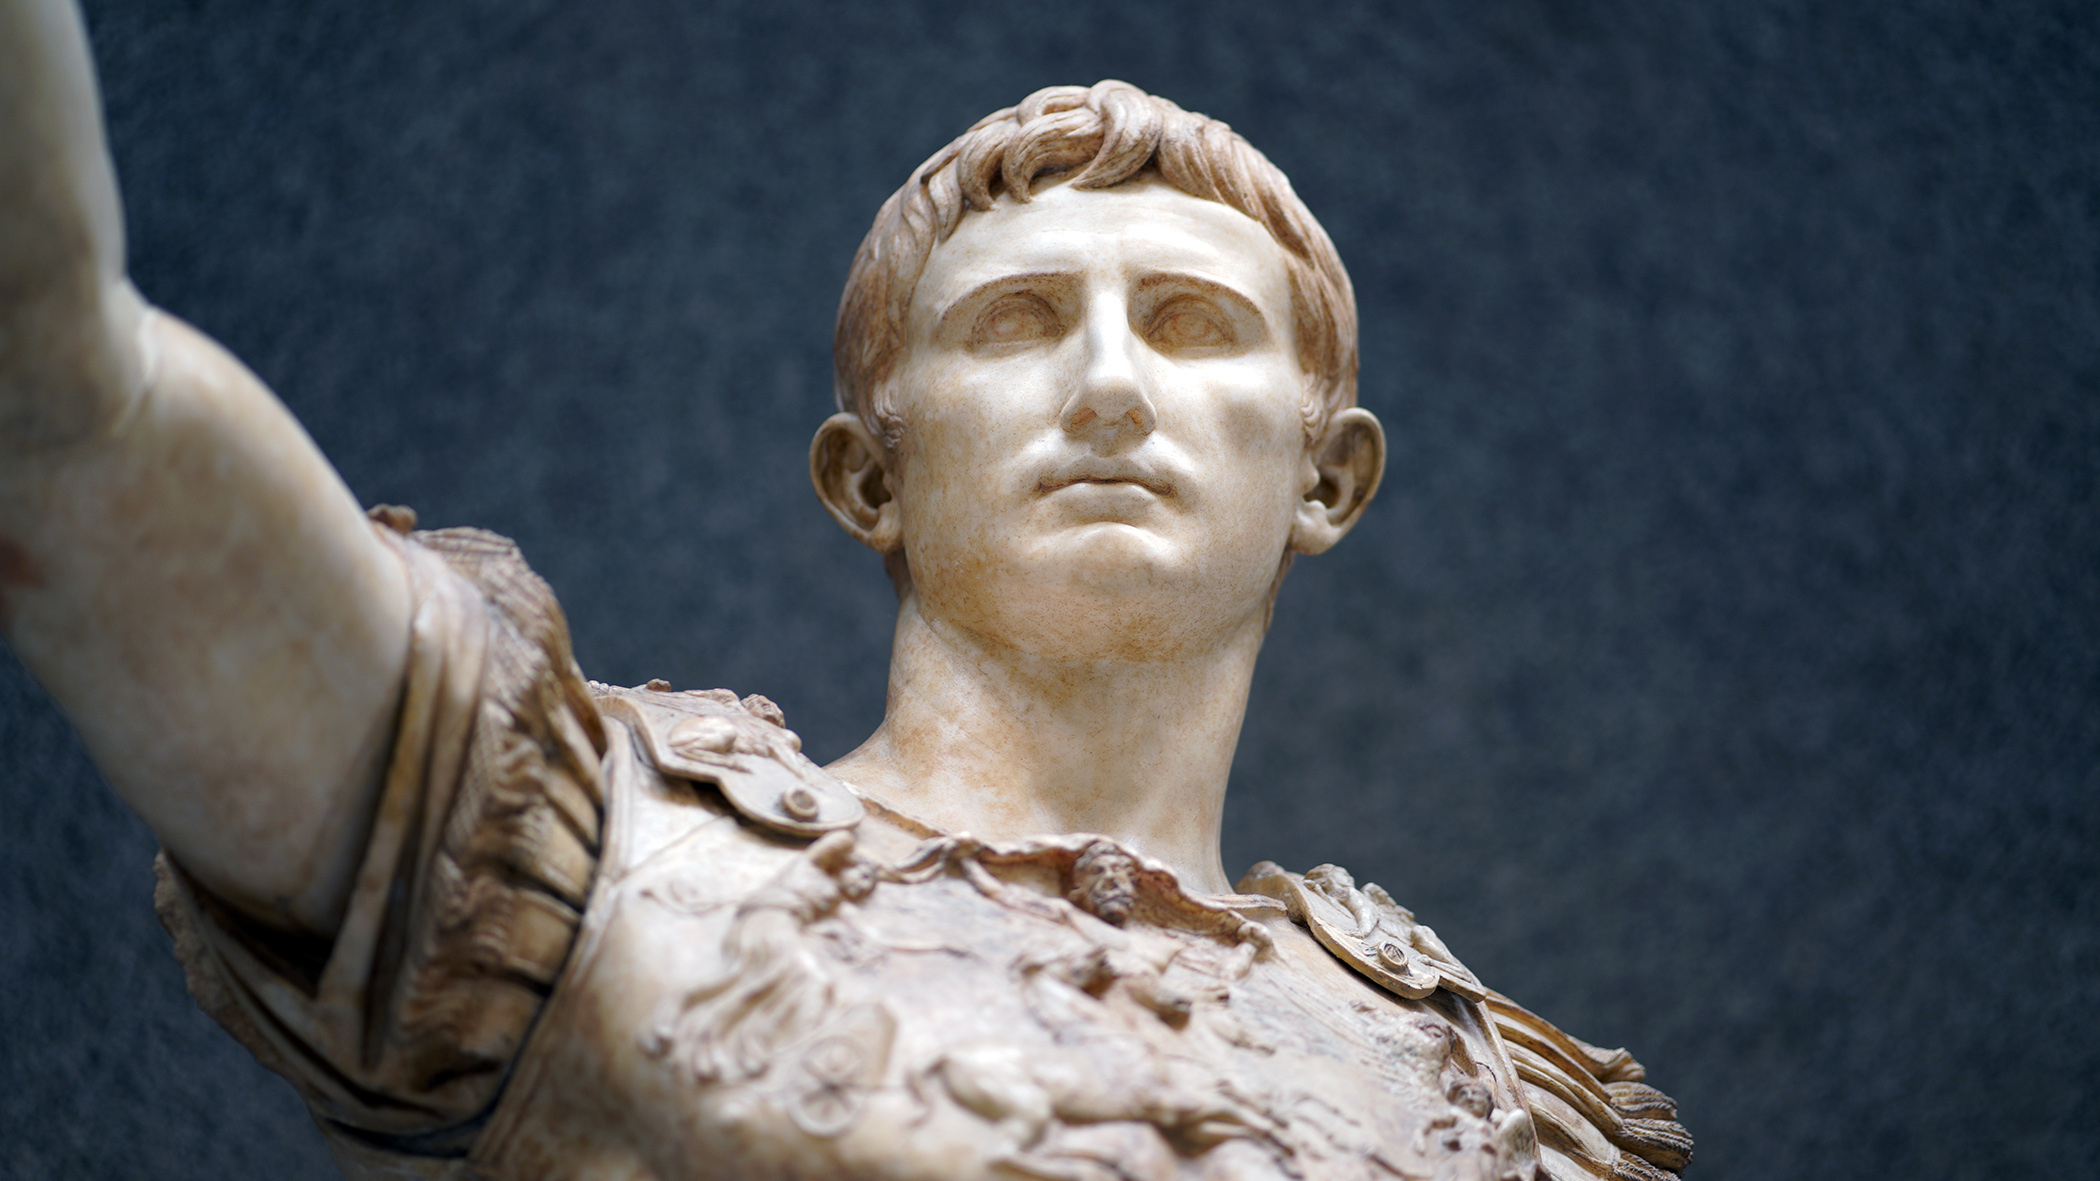 Detail, Augustus of Primaporta, 1st century C.E., marble, 2.03 meters high (Vatican Museums) (photo: Steven Zucker, CC BY-NC-SA 2.0)